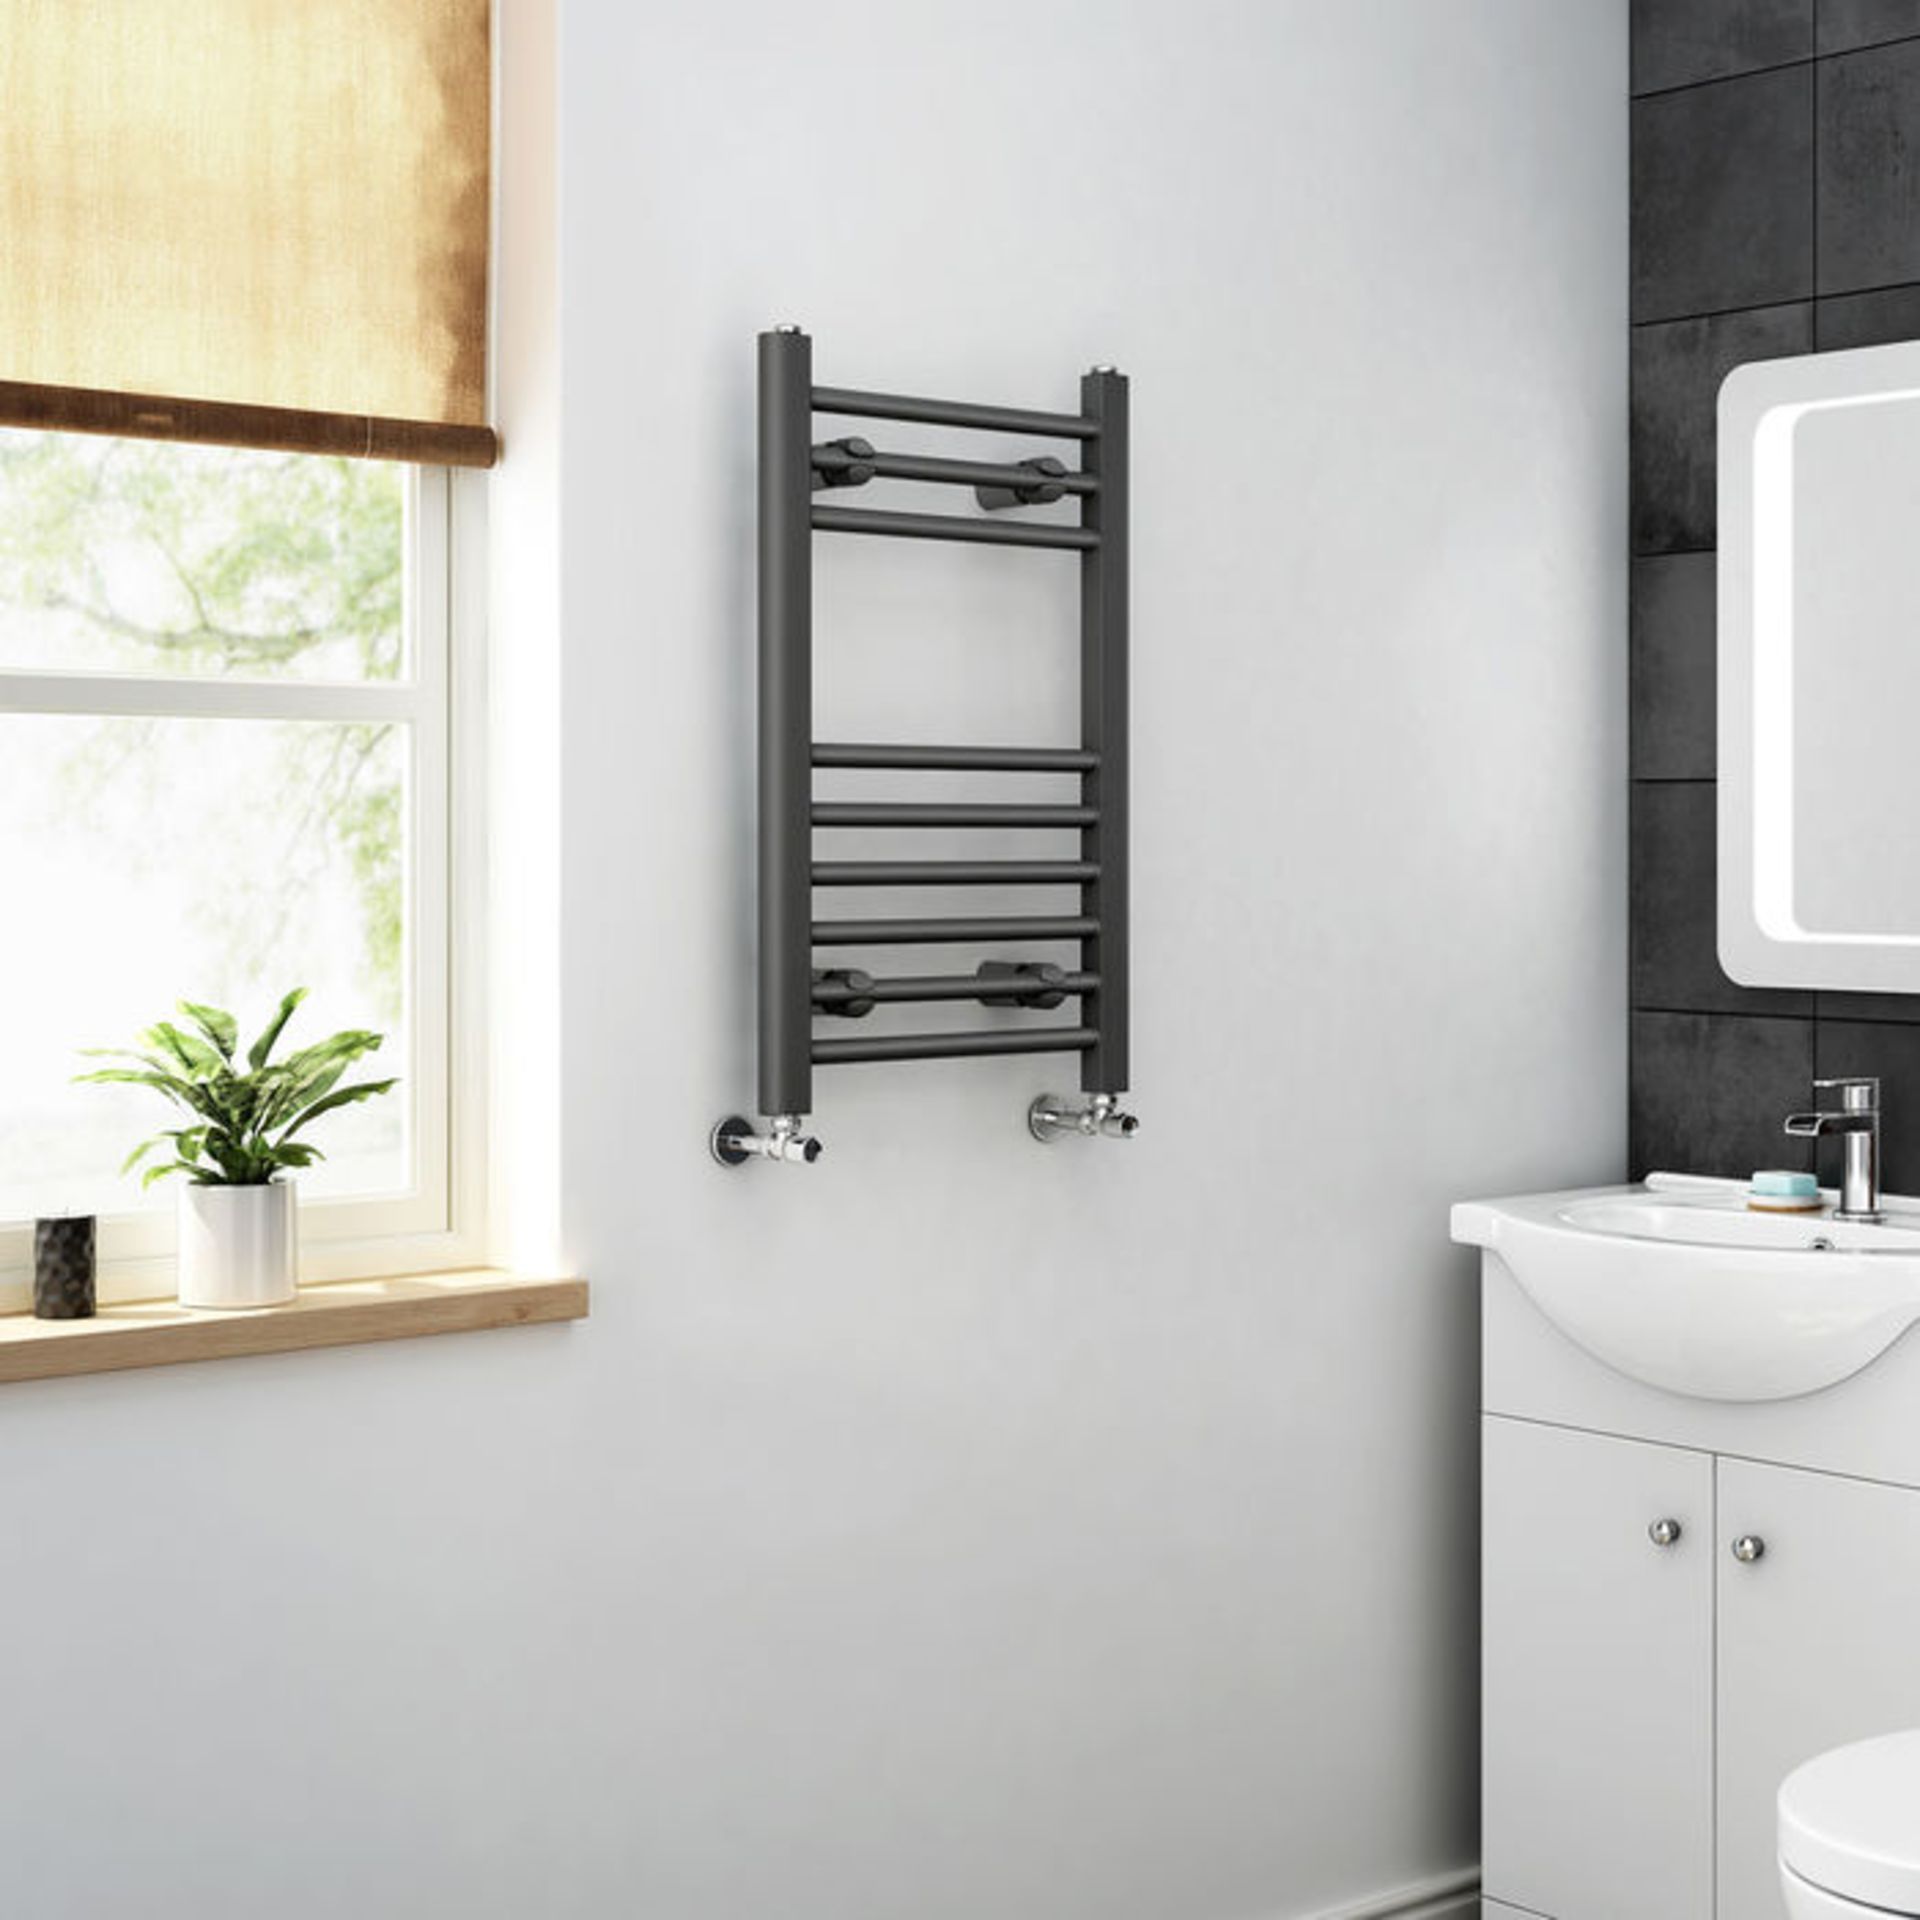 (LP141) 650x400mm Straight Heated Towel Radiator. Low carbon steel chrome plated radiator This - Image 2 of 2